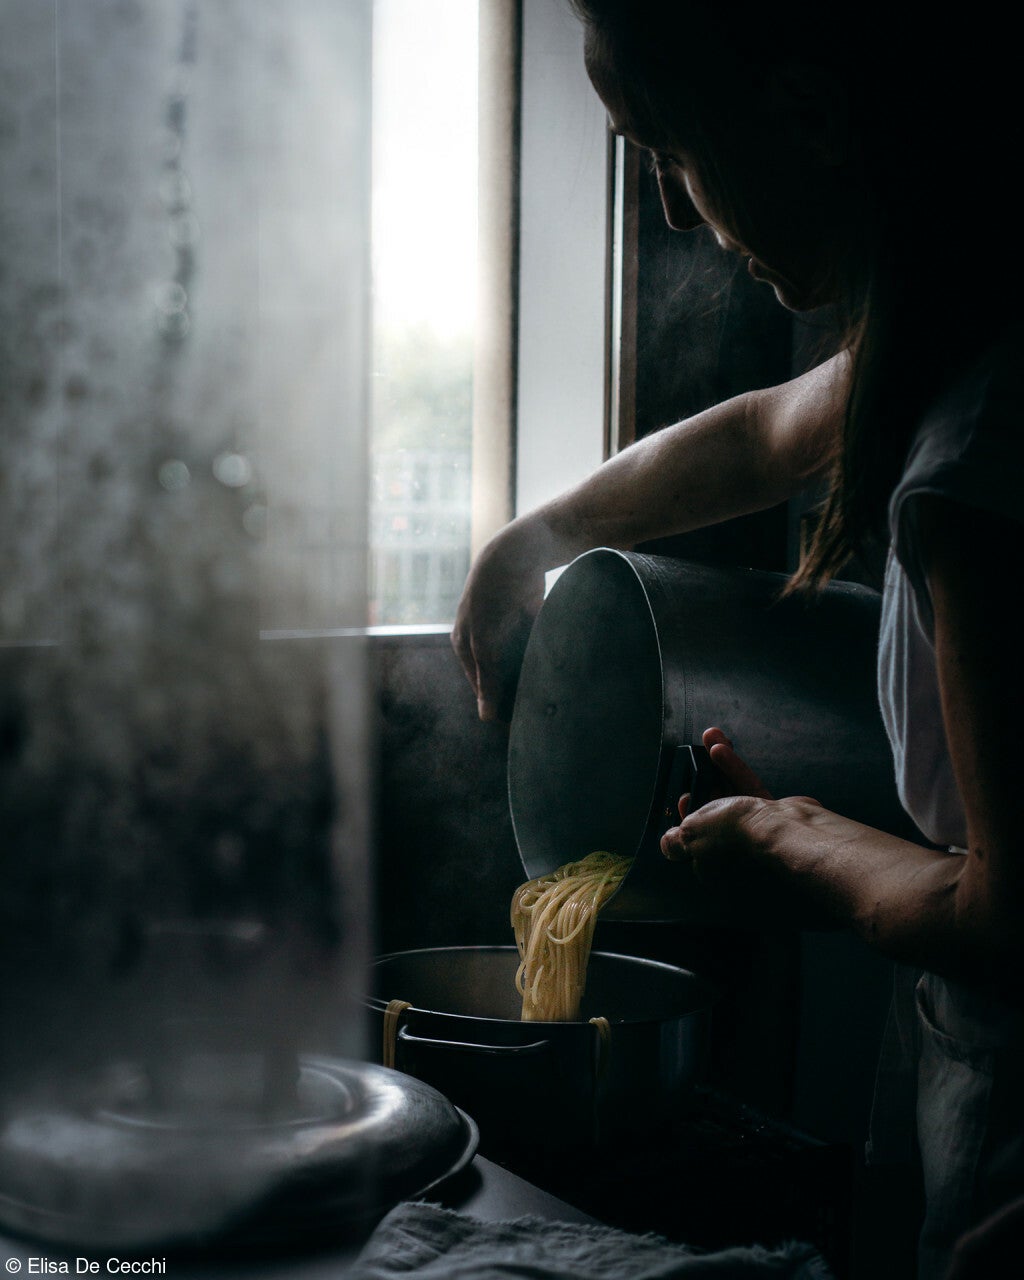 a person drains pasta through the kitchen window on a dark cloudy day